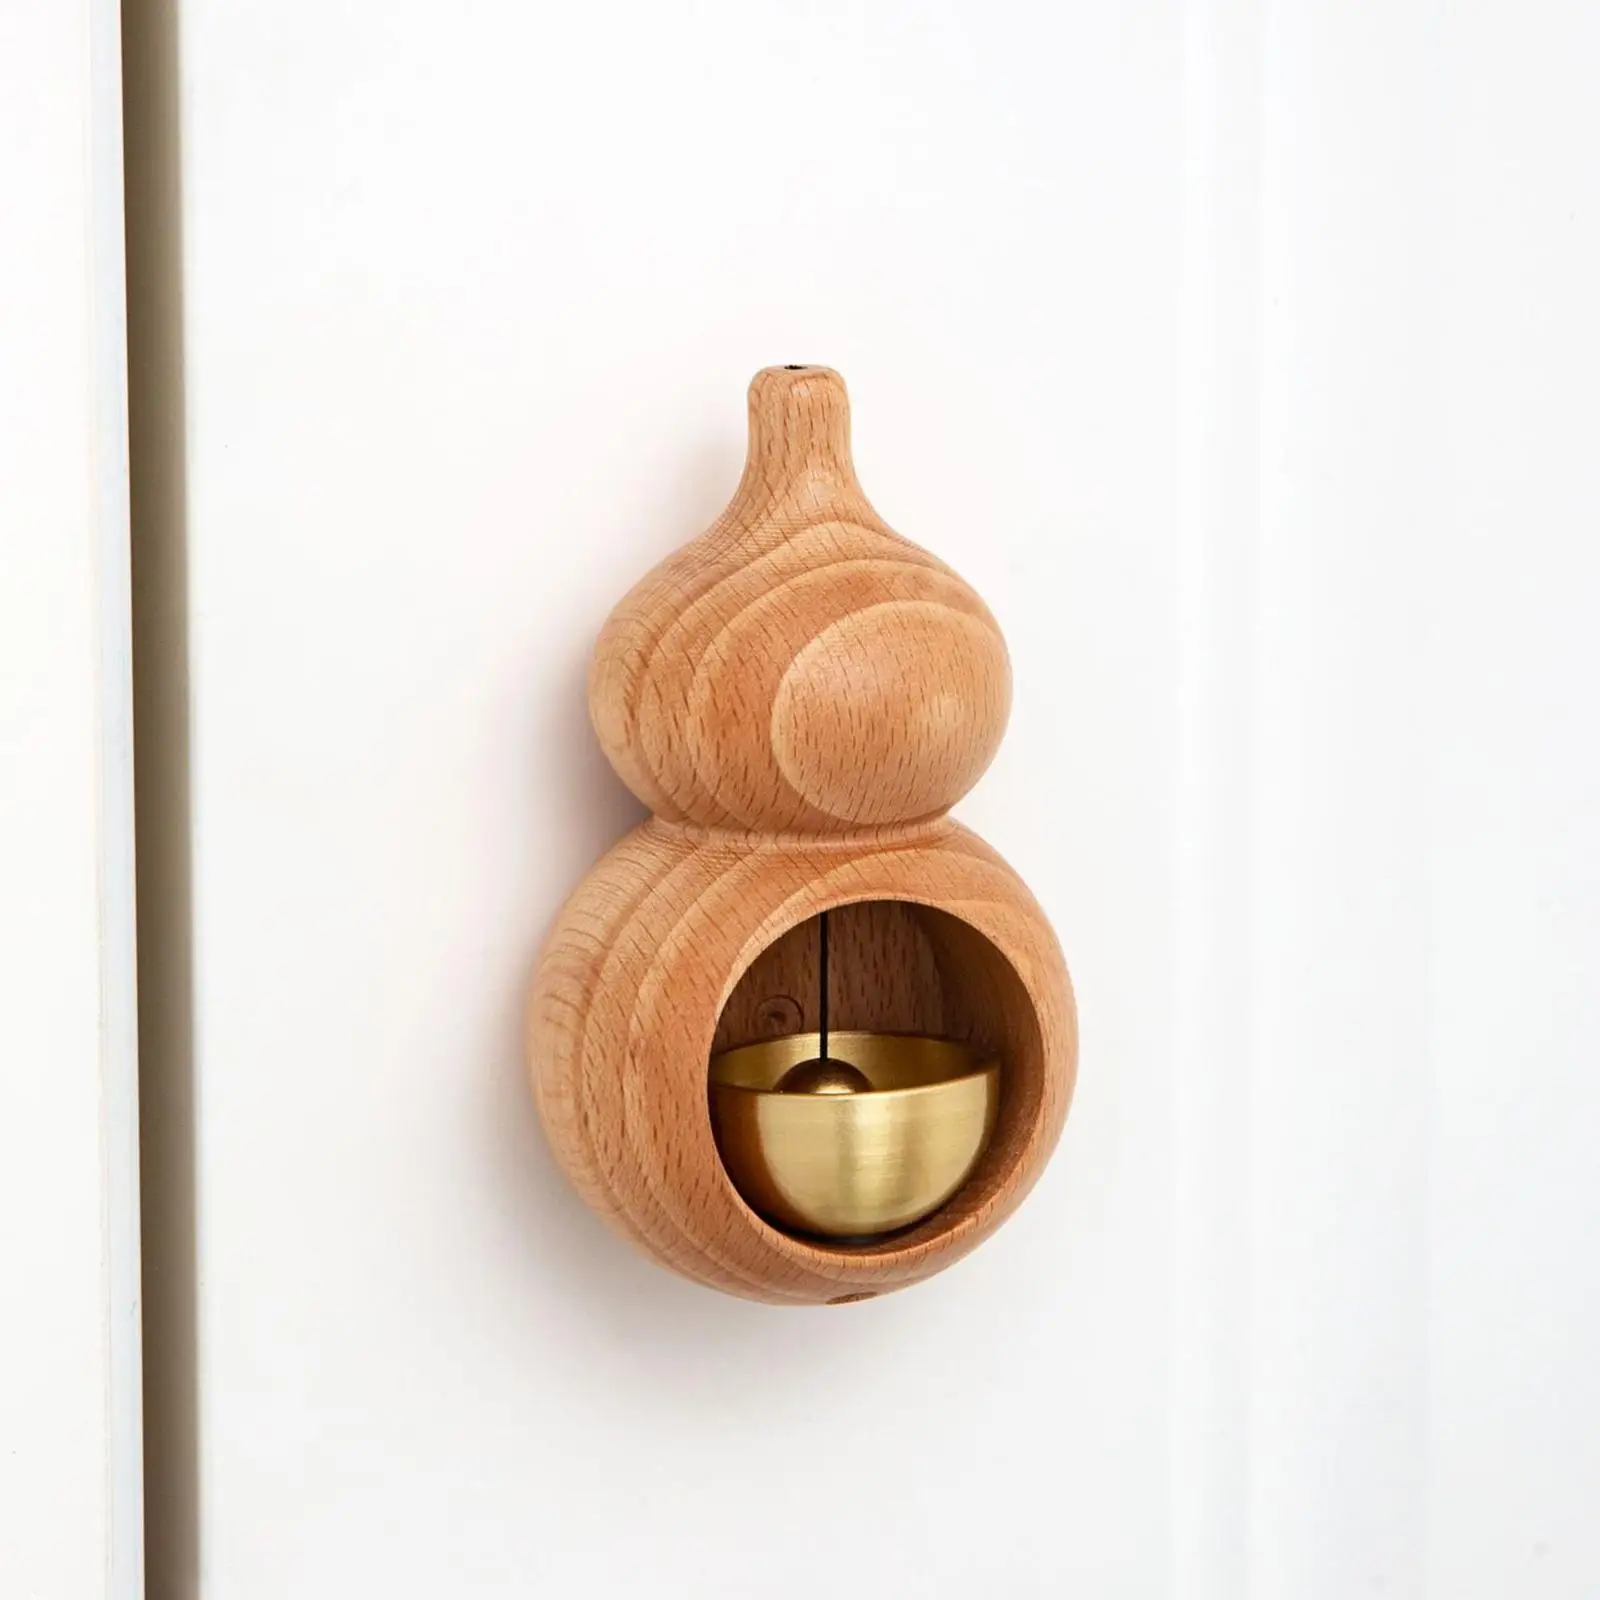 Shopkeepers Bell Lucky Gourd Gate Bell Chime Entry Doorbells Chime Wood Doorbells for Wardrobe Gate Entering Store Refrigerator